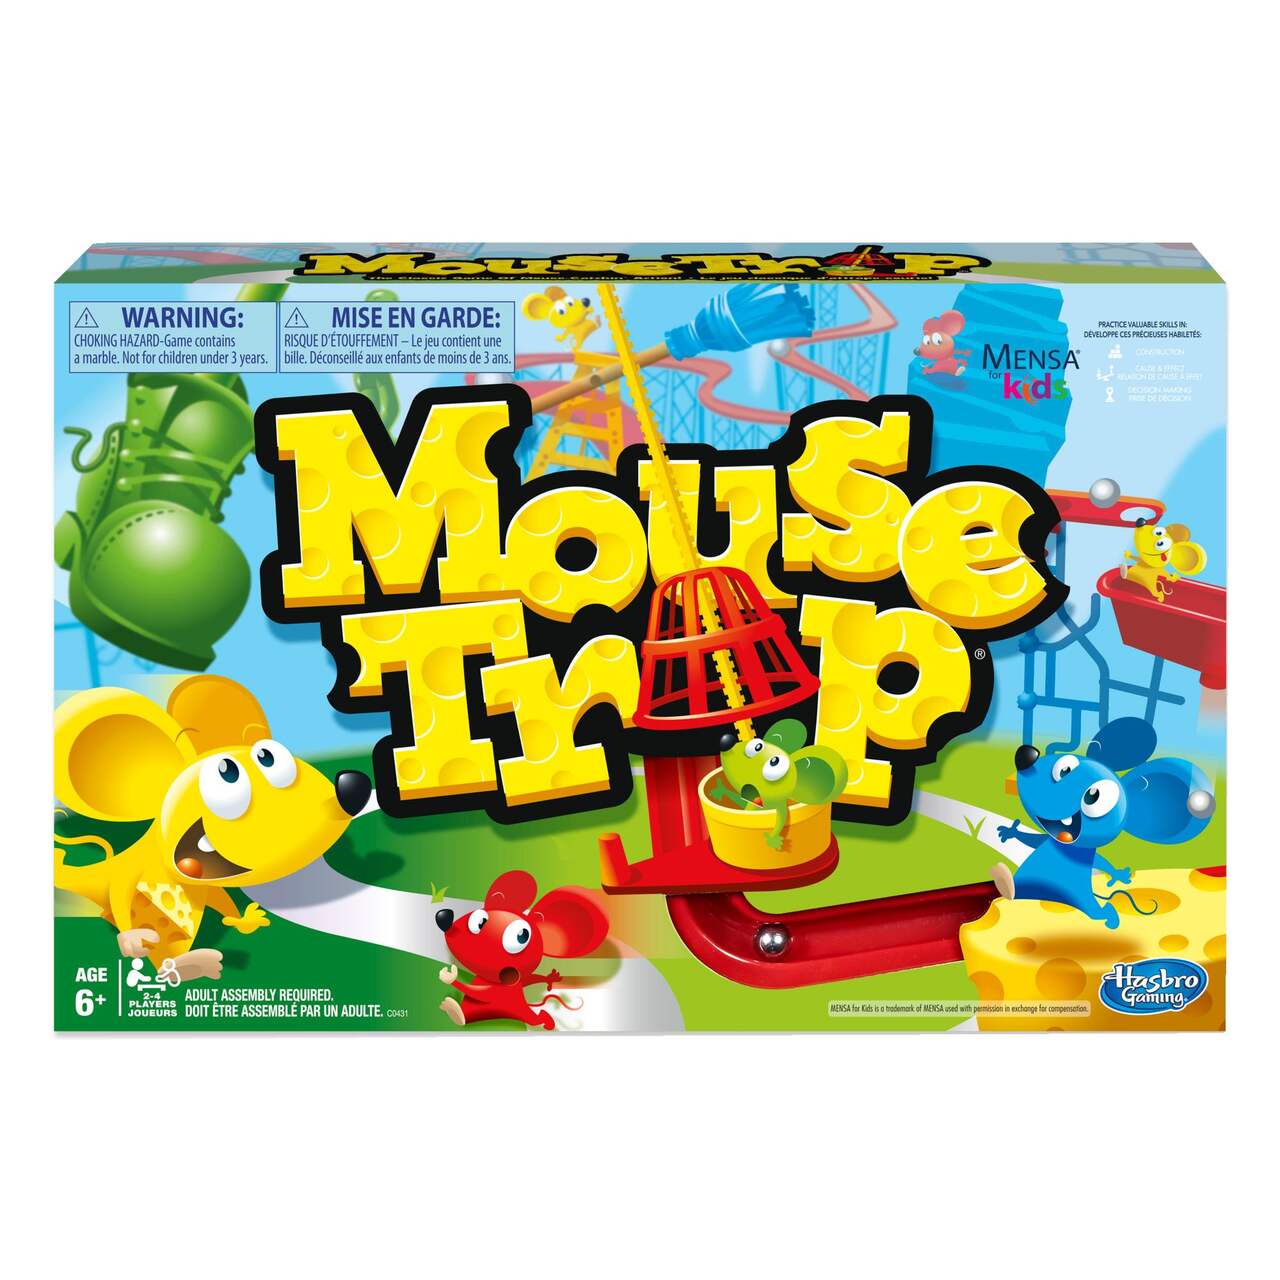 Hasbro Mousetrap Classic Board Game For Kids, Ages 6+